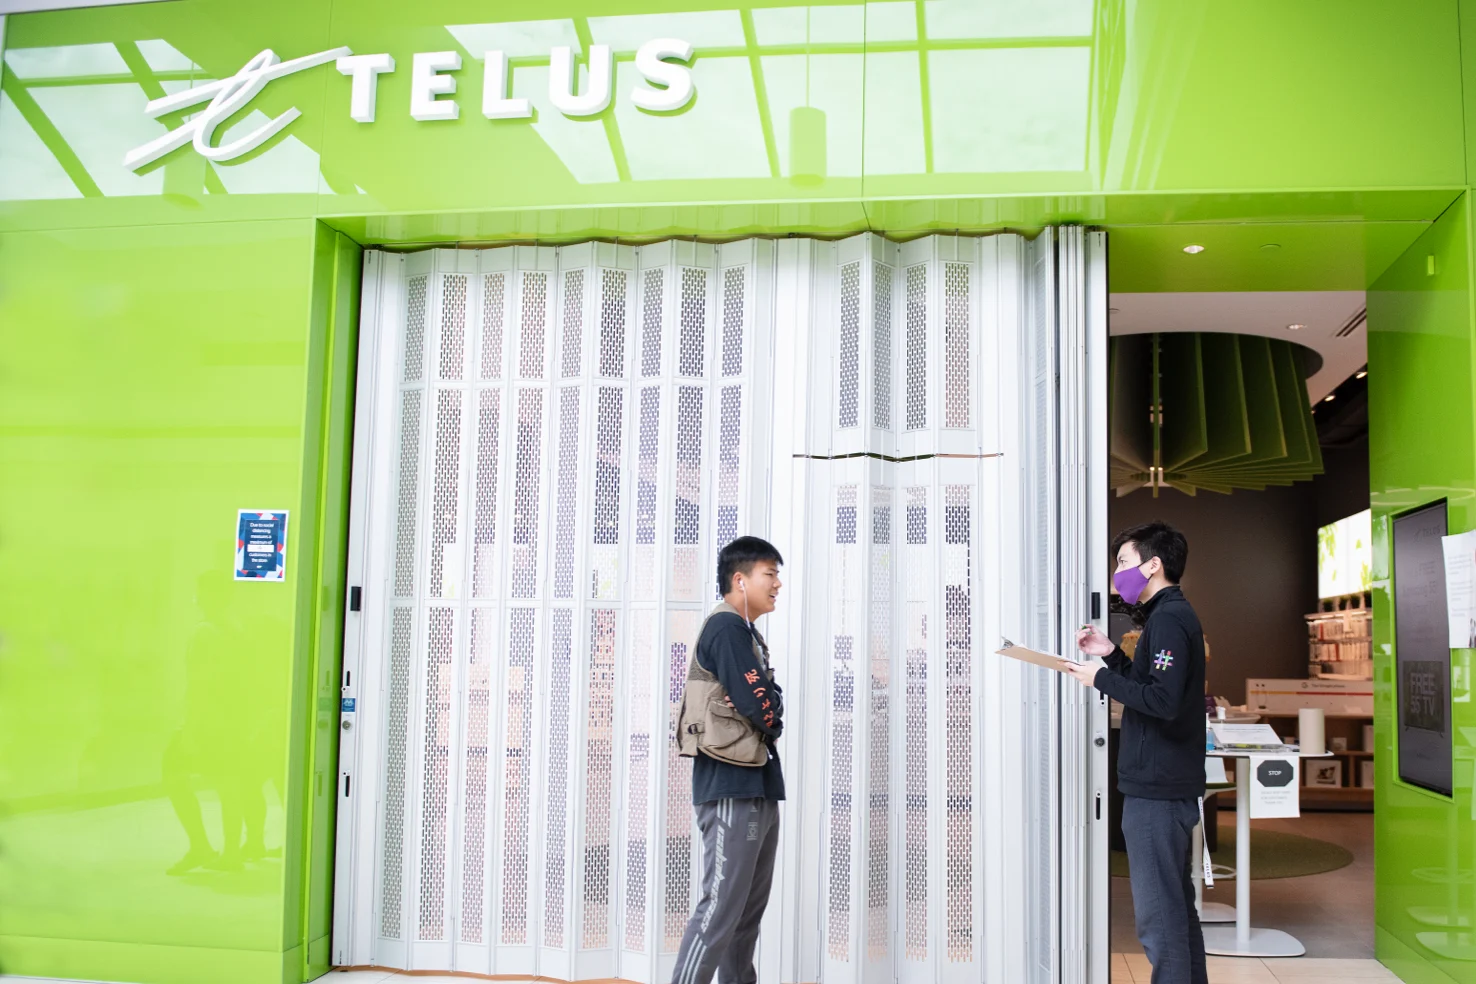 A TELUS employee greets a customer at the entrance to one of our retail stores.